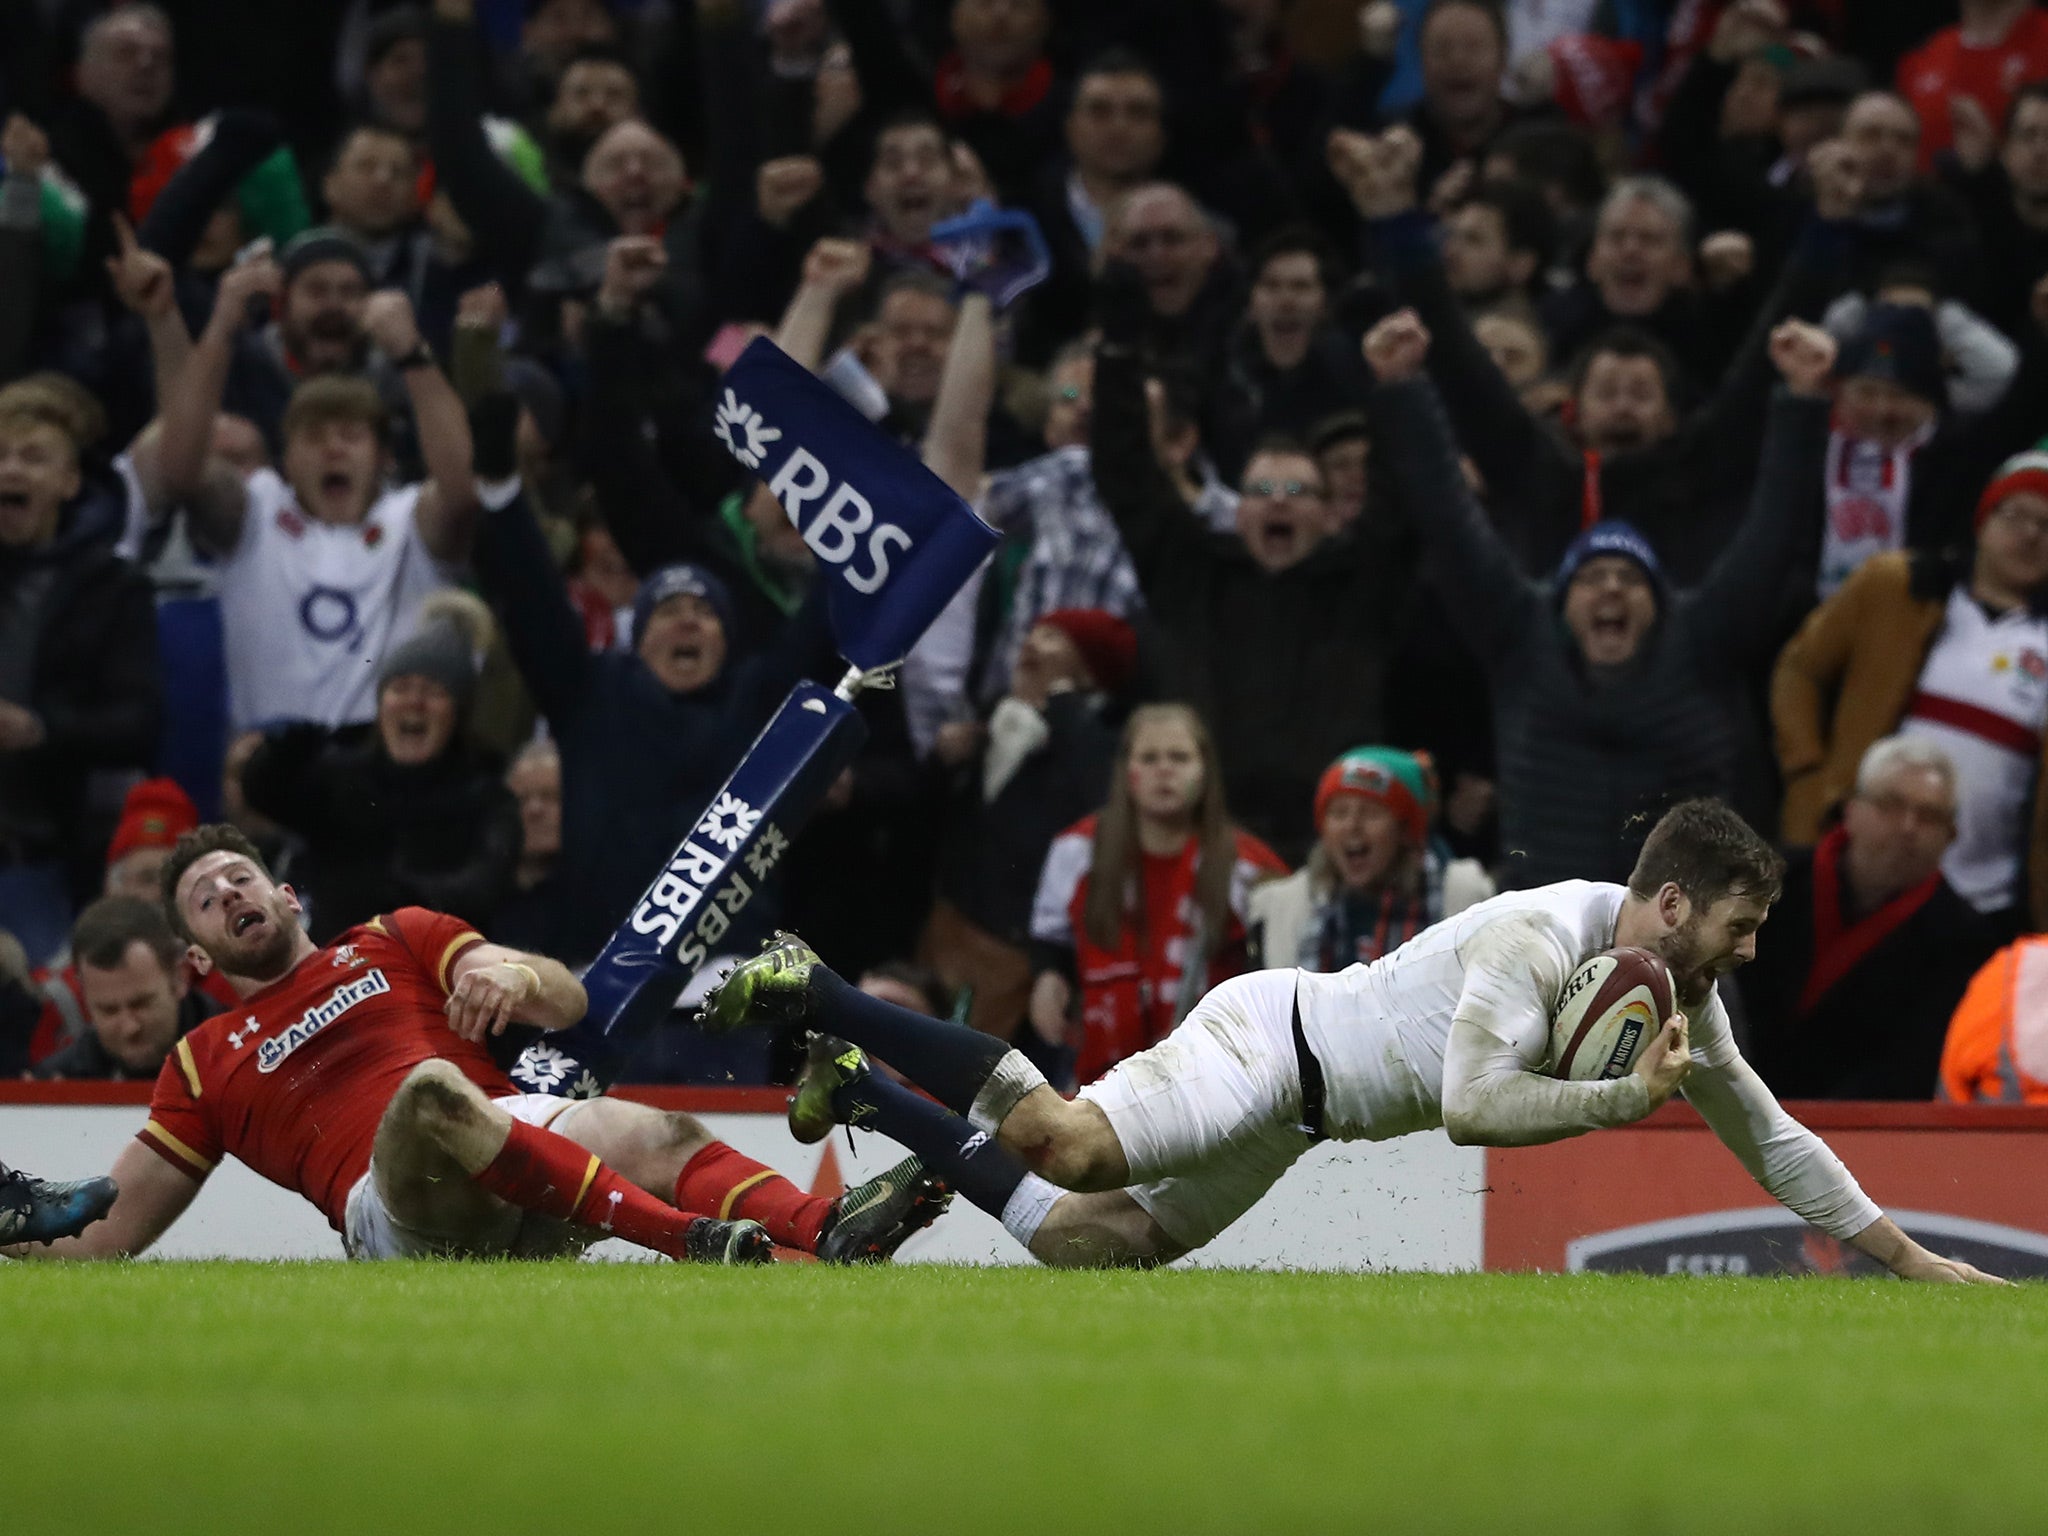 Elliott Daly's late try provided a dramatic finish and broke Welsh hearts in Cardiff